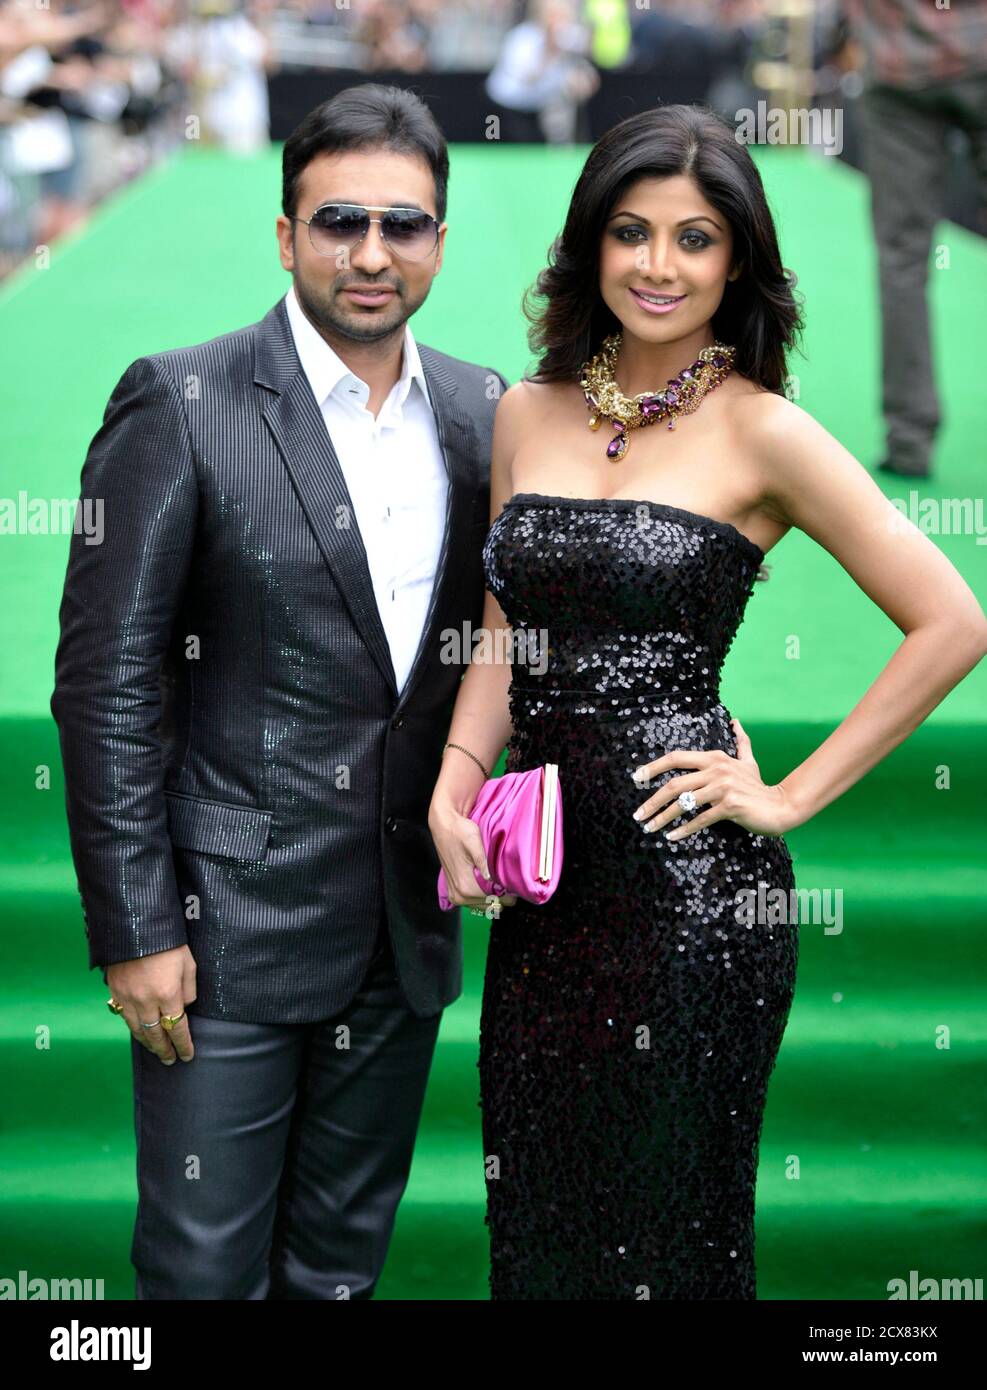 Bollywood actress Shilpa Shetty and husband Raj Kundra arrive on the green carpet during the International Indian Film Academy (IIFA) Awards in Toronto June 25, 2011. REUTERS/Mike Cassese (CANADA - Tags: ENTERTAINMENT) Stock Photo